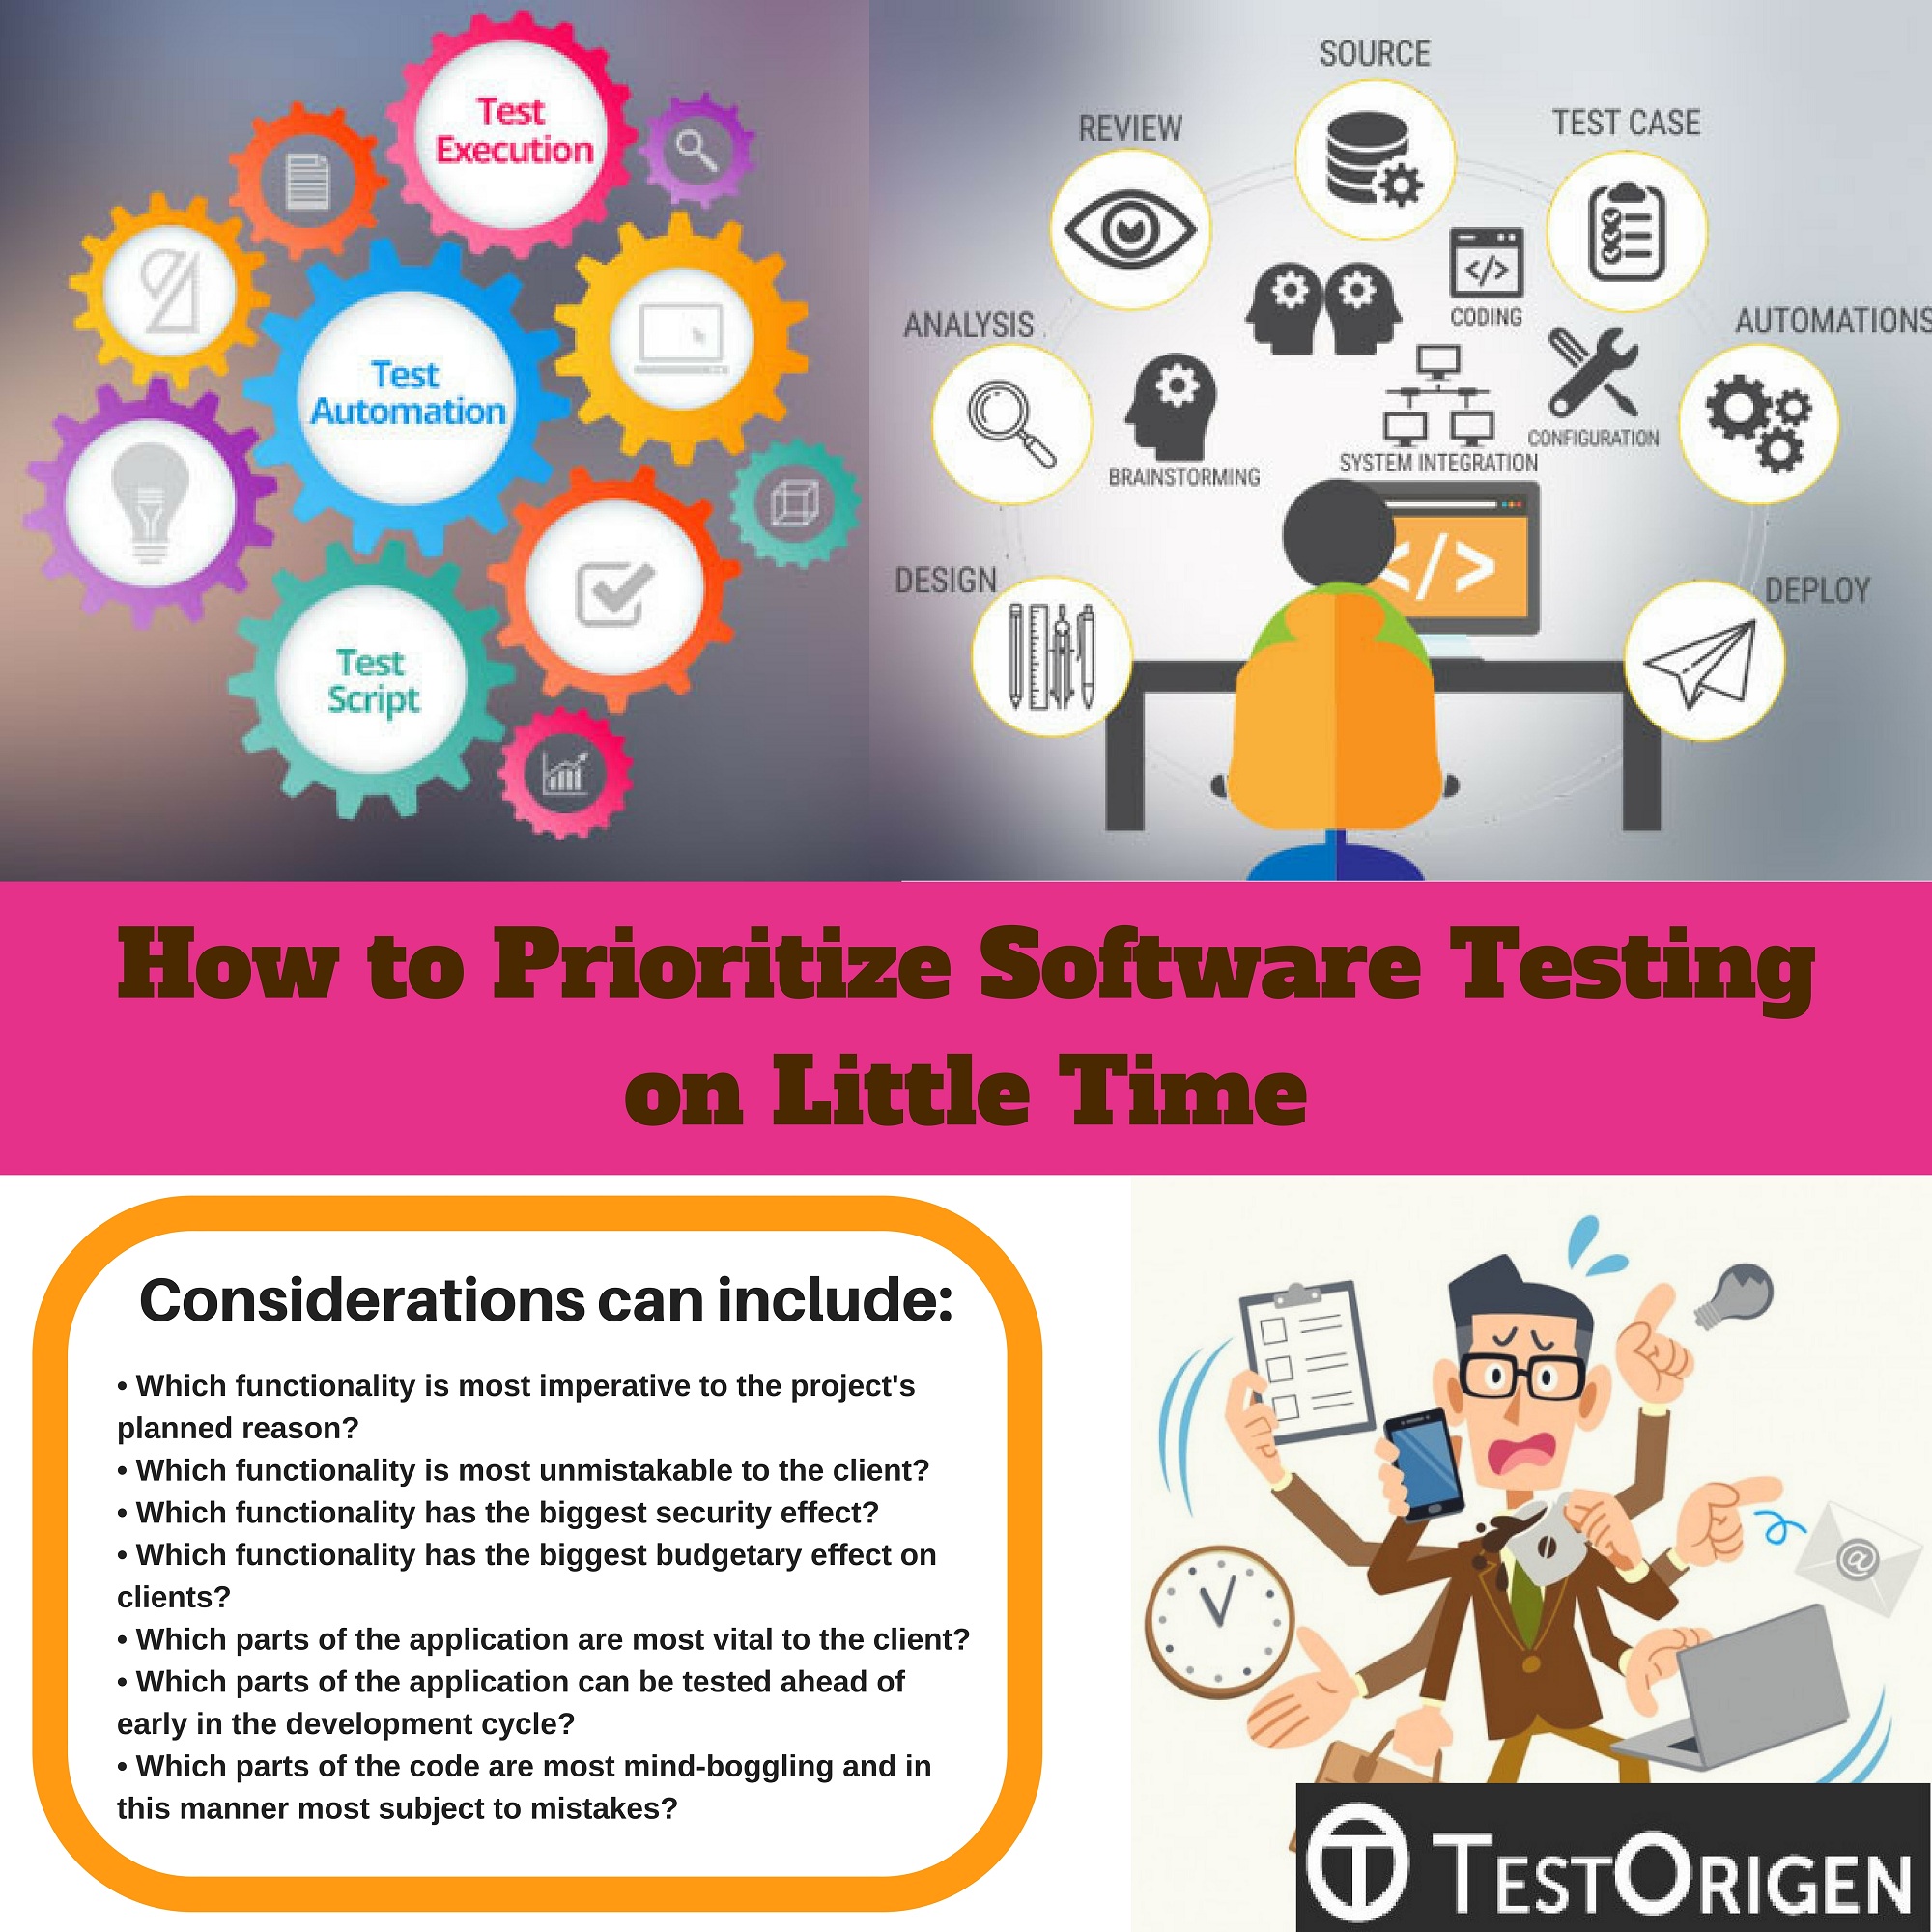 How to Prioritize Software Testing on Little Time